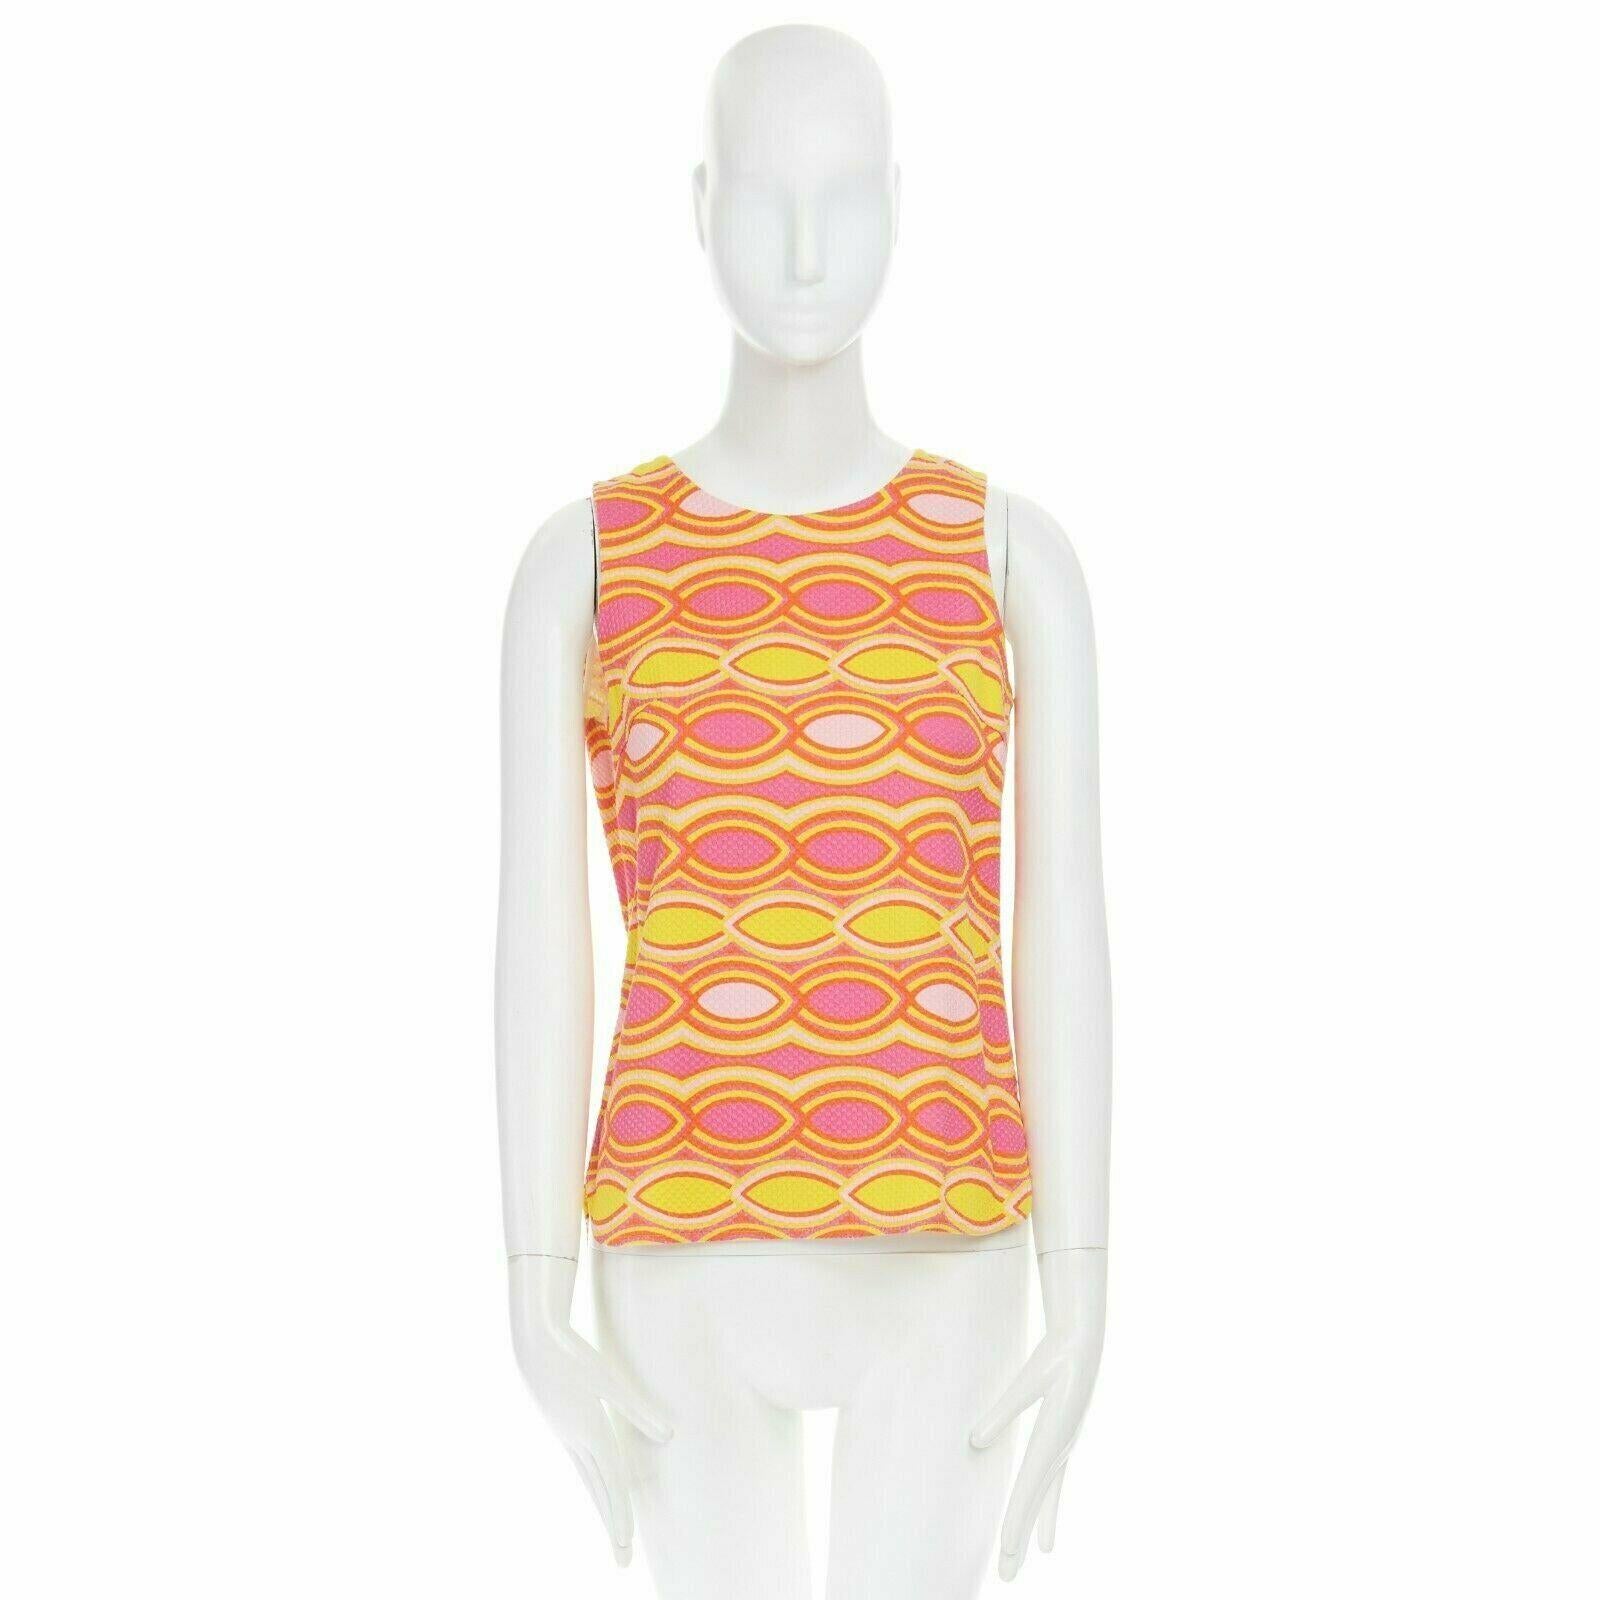 LISA PERRY 60s mod con pink yellow geometric print textured cotton top US2 UK6 S 
Reference: LNKO/A00238 
Brand: Lisa Perry 
Material: Cotton 
Color: Pink 
Pattern: Geometric 
Extra Detail: 100% cotton. Late 60's ModCon inspired. Pink and yellow